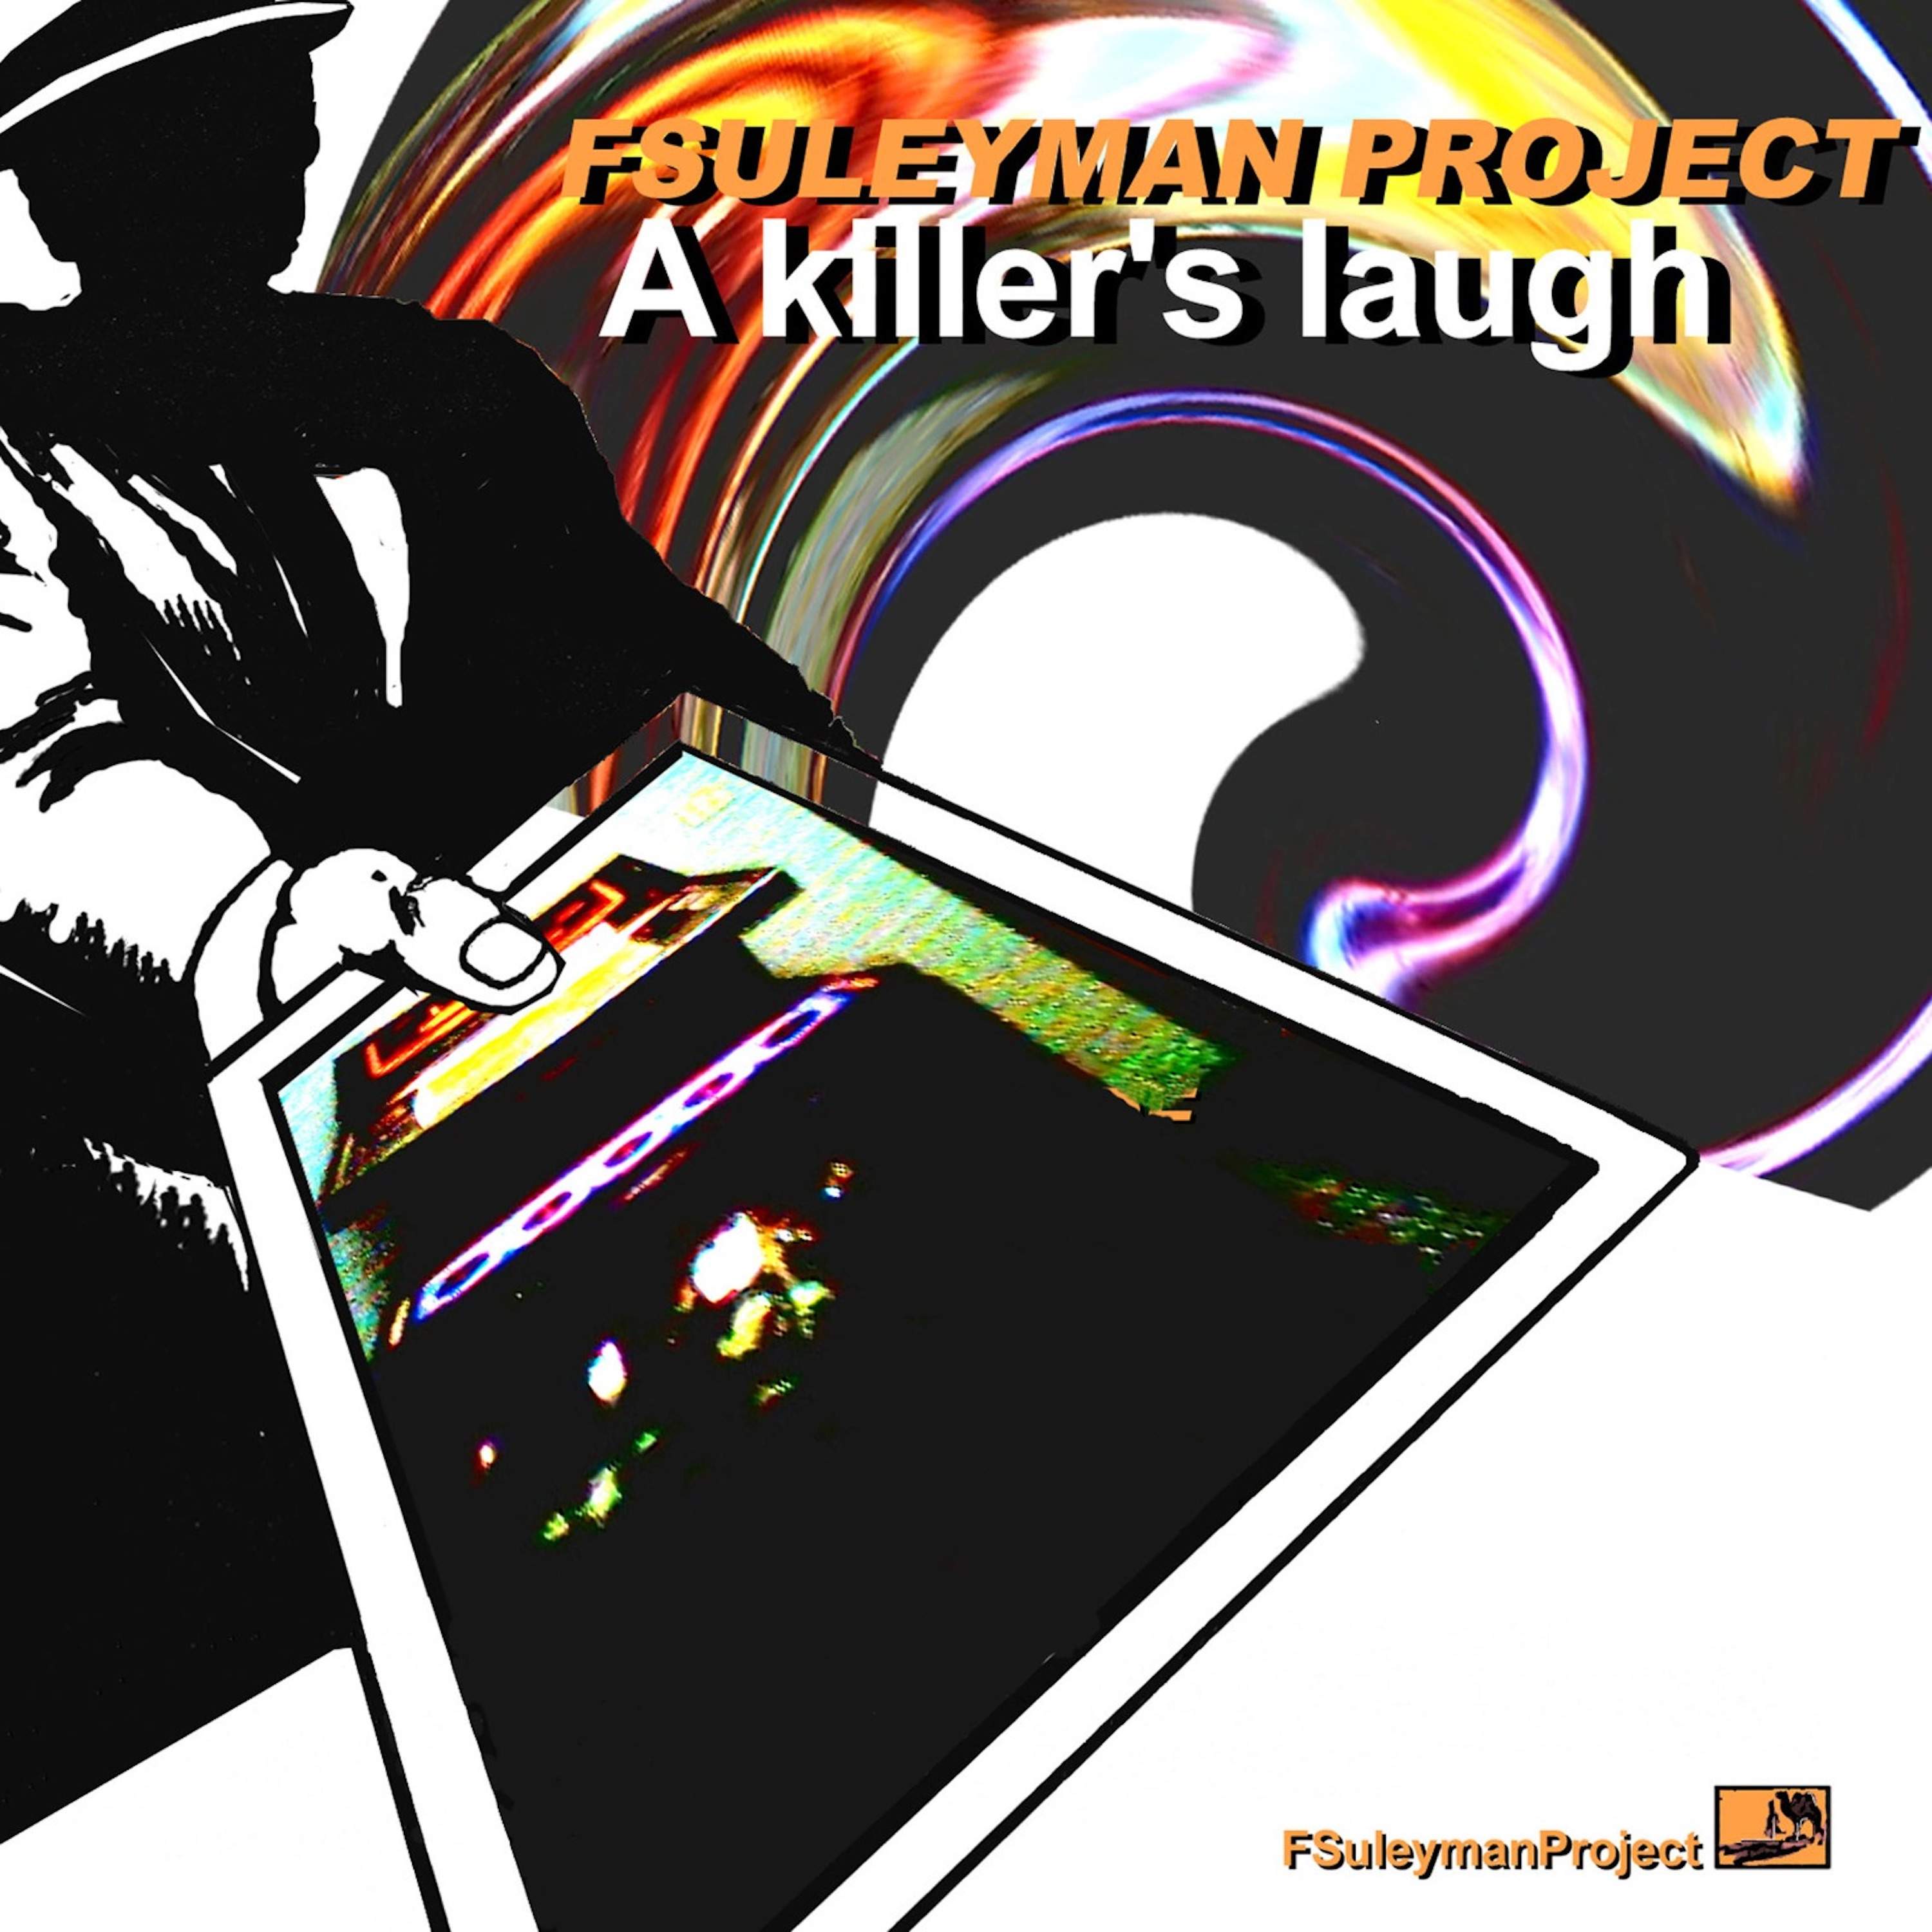 A Killer's Laugh is the brand new album performed by F.Suleyman Project